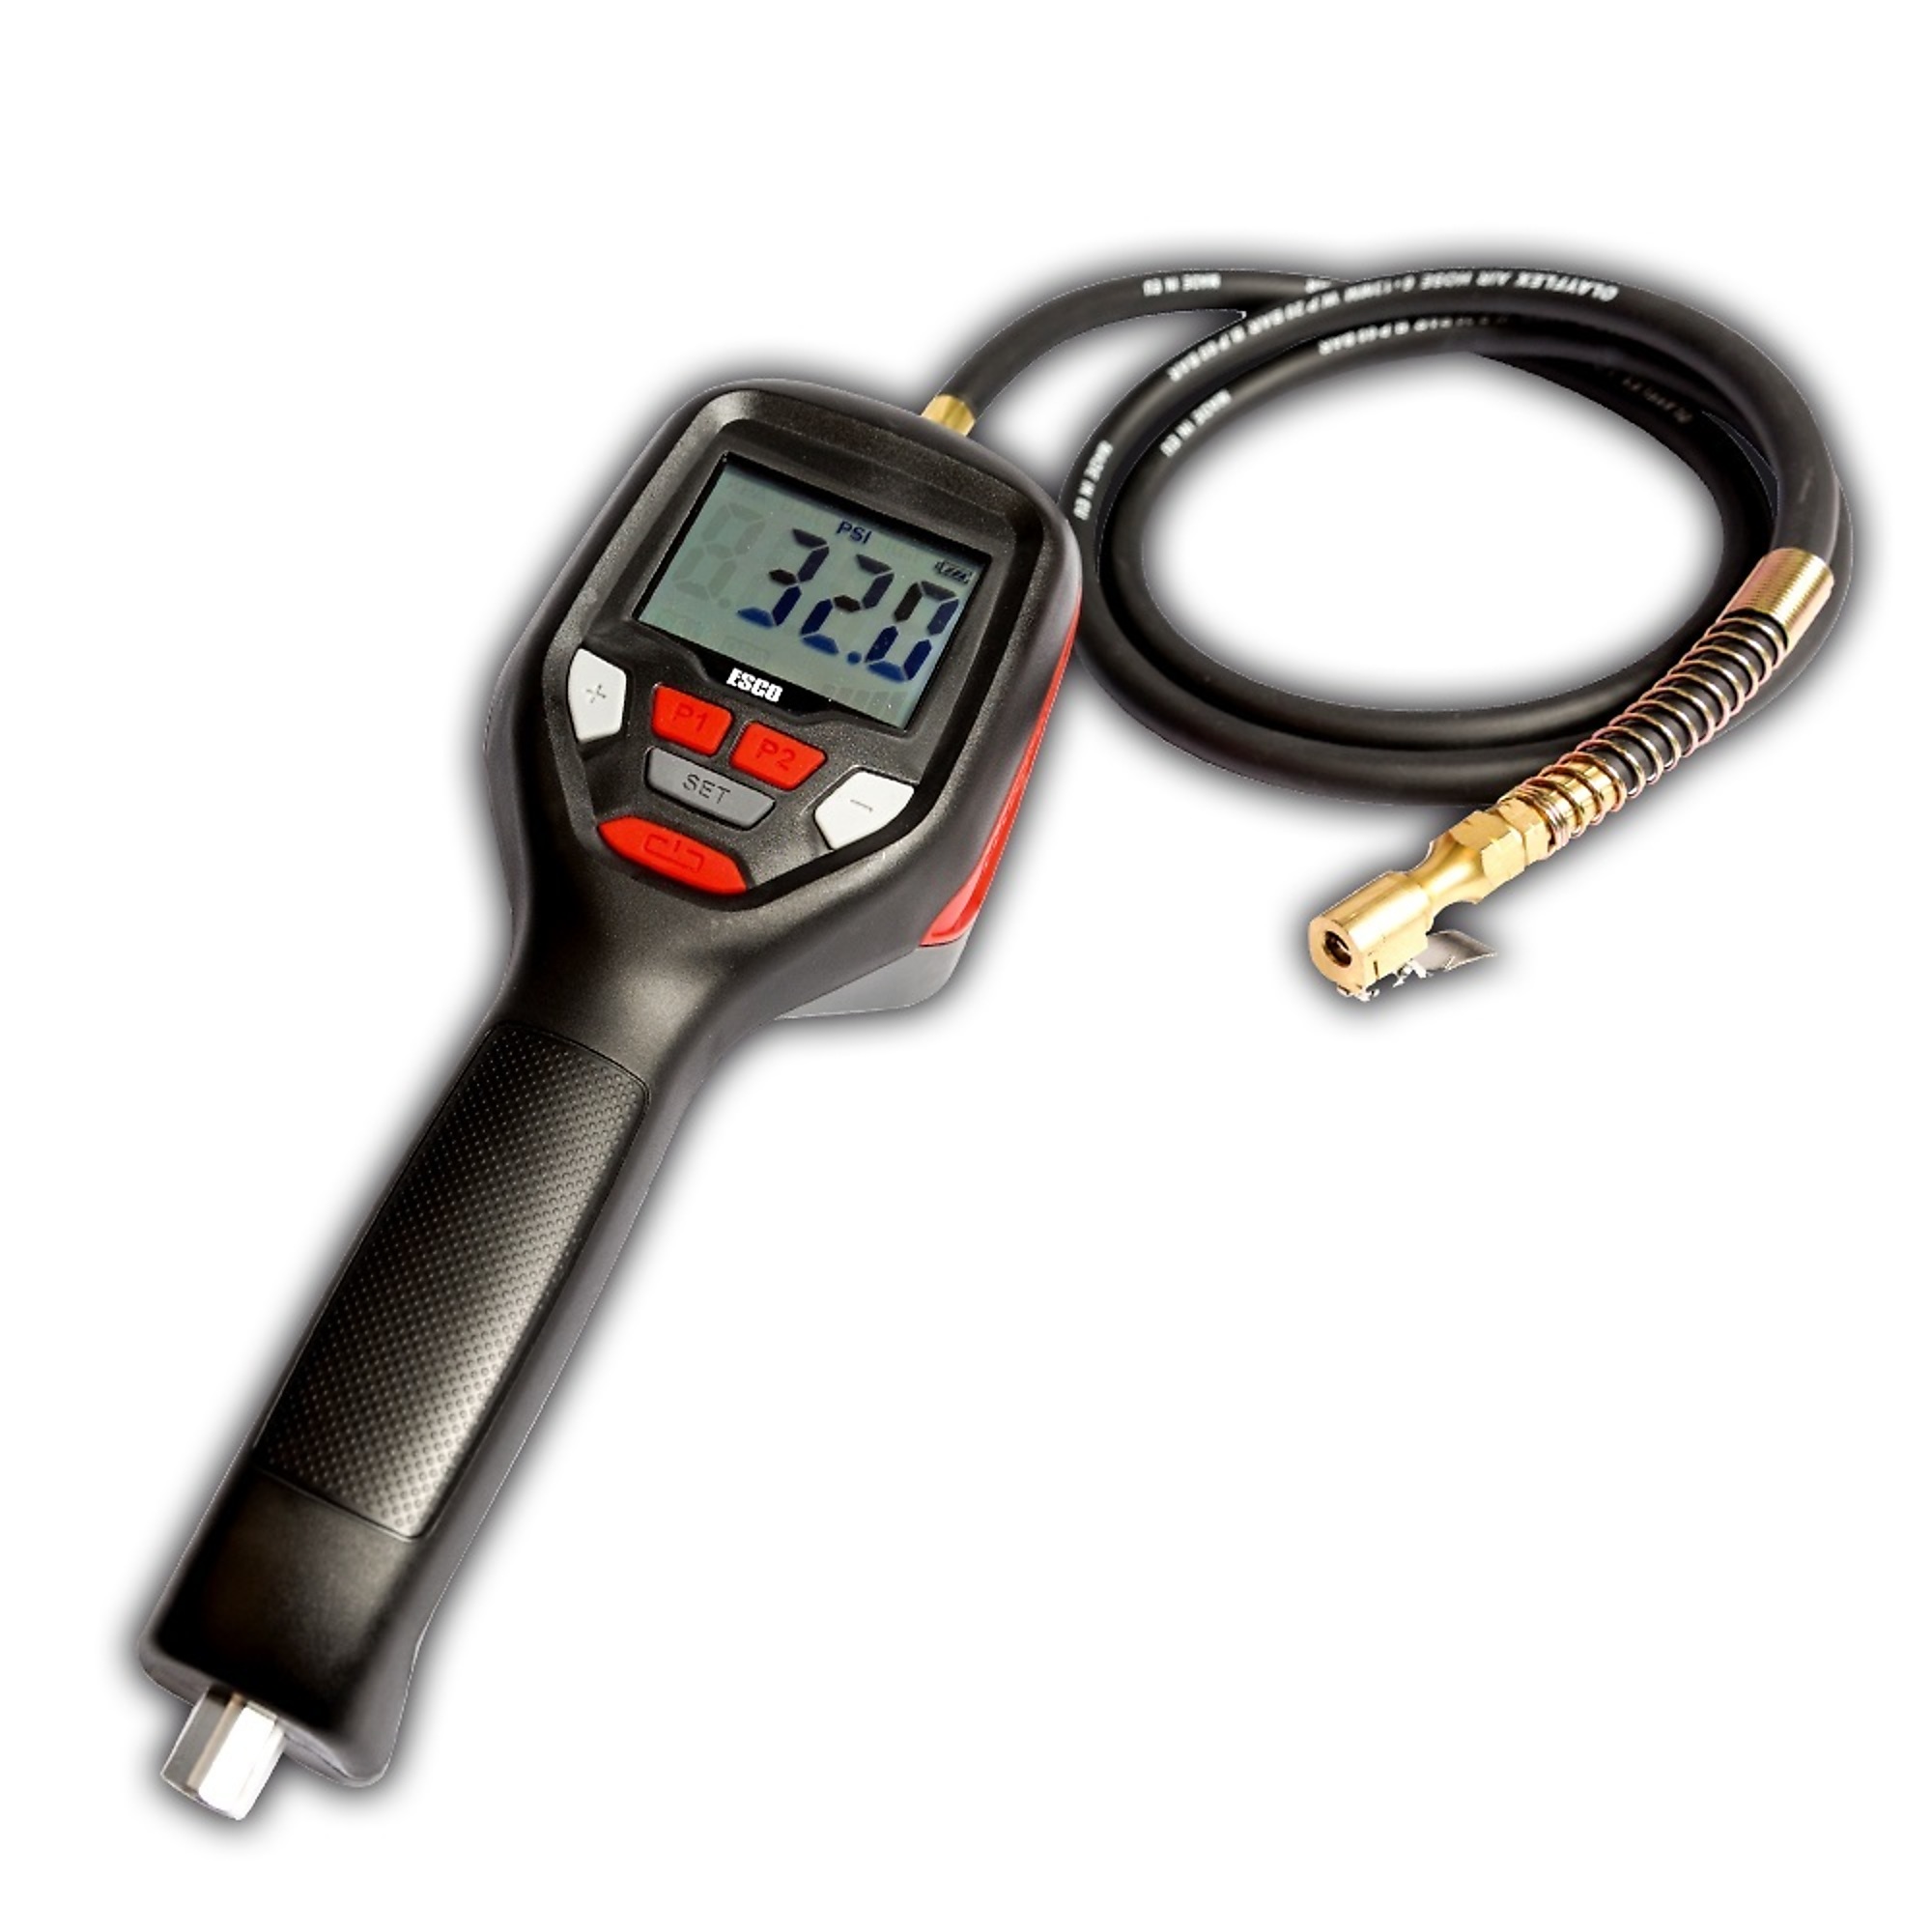 ESCO, Automatic Tire Inflator Digital LCD Rechargable, Max. PSI 174 Power Source Battery, Model 10963